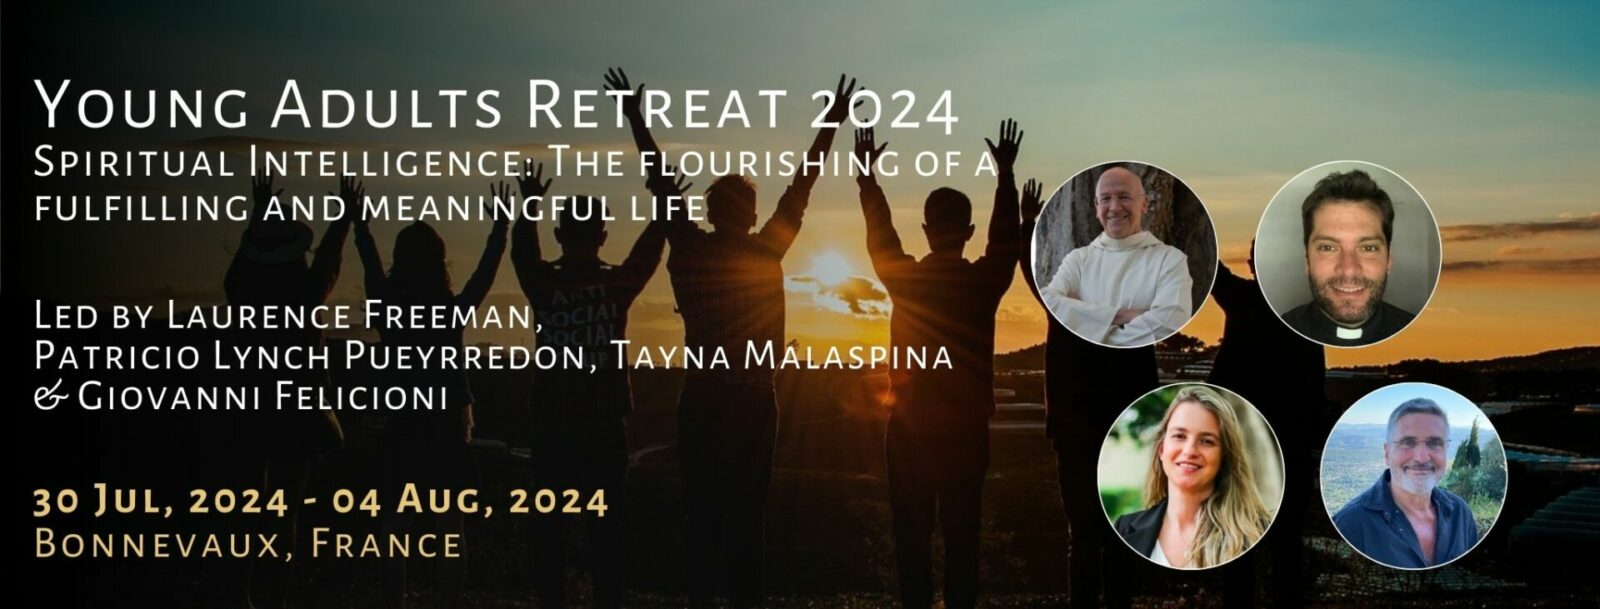 Young Adults Retreat 2024